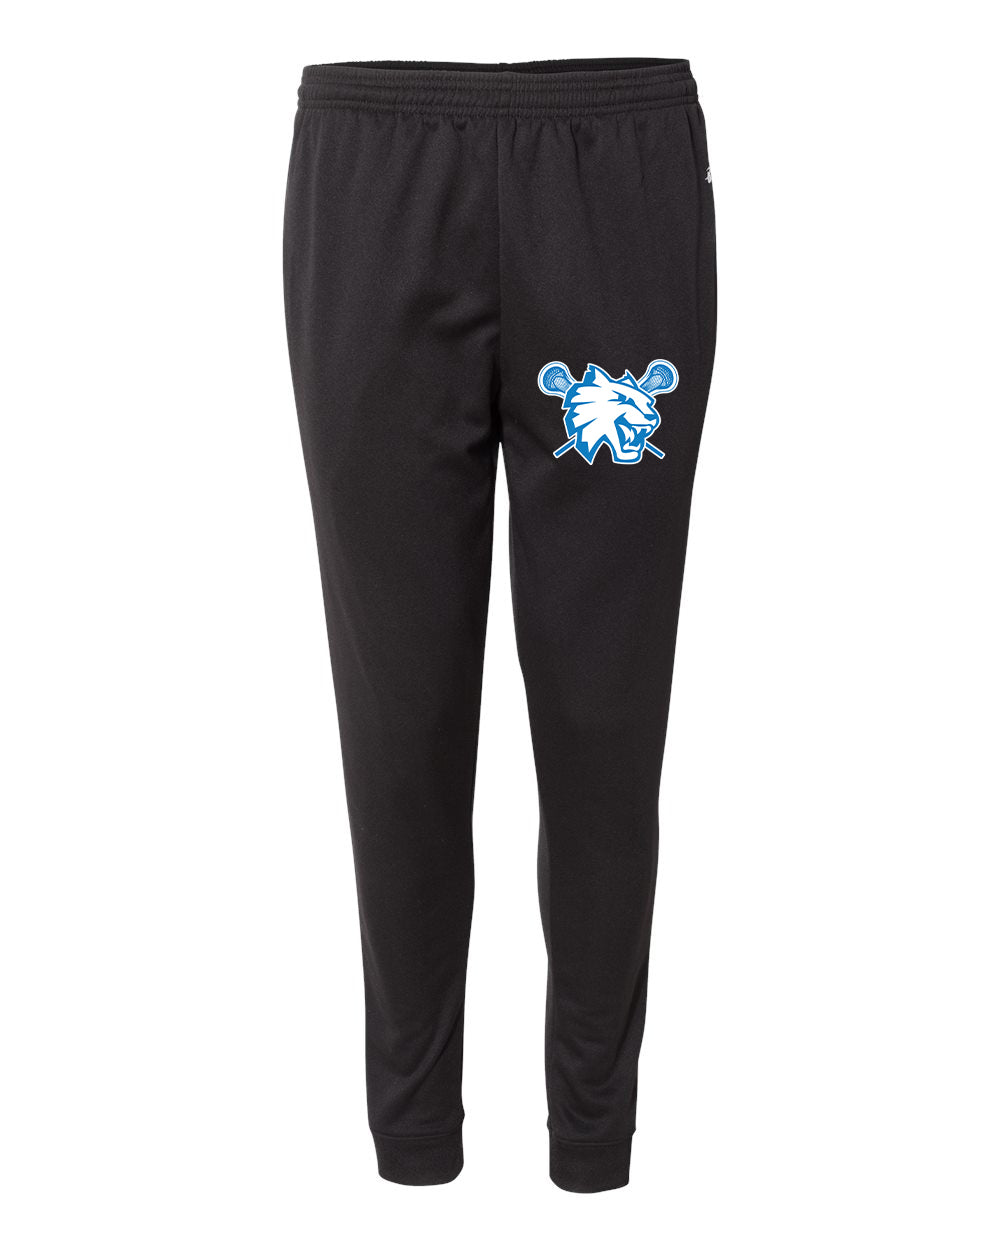 Suffield Youth Lacrosse - Adult Joggers "Cat" - 1475 (color options available)